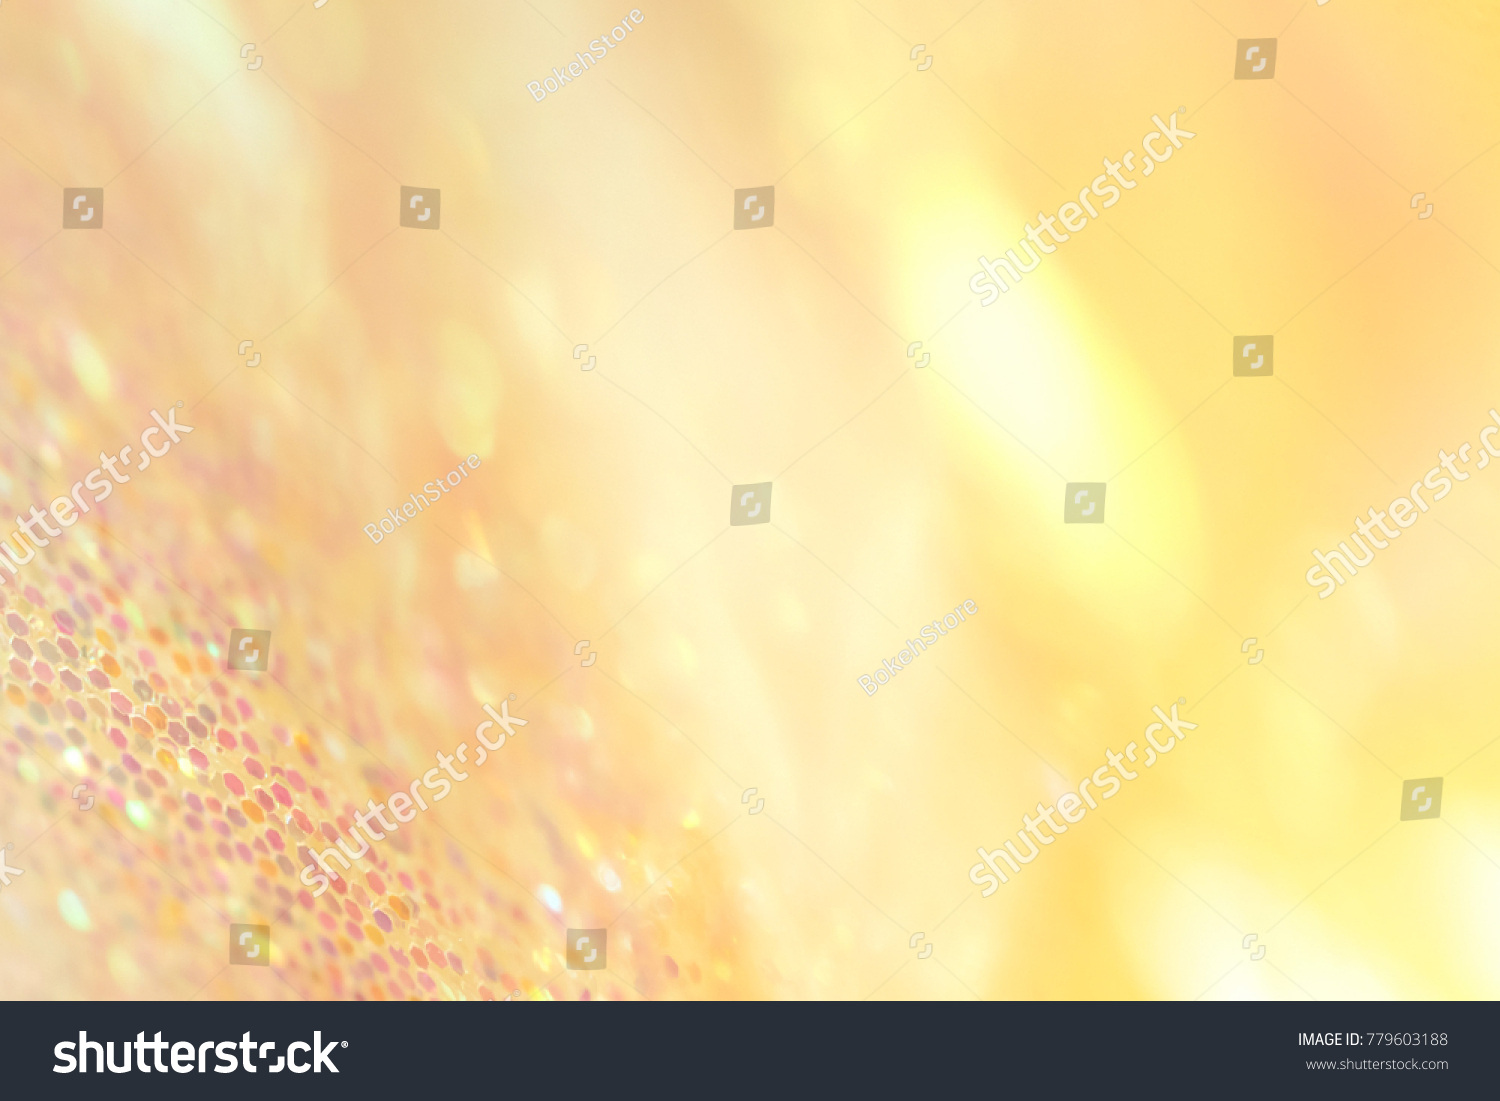 Gold glitters abstract background #779603188